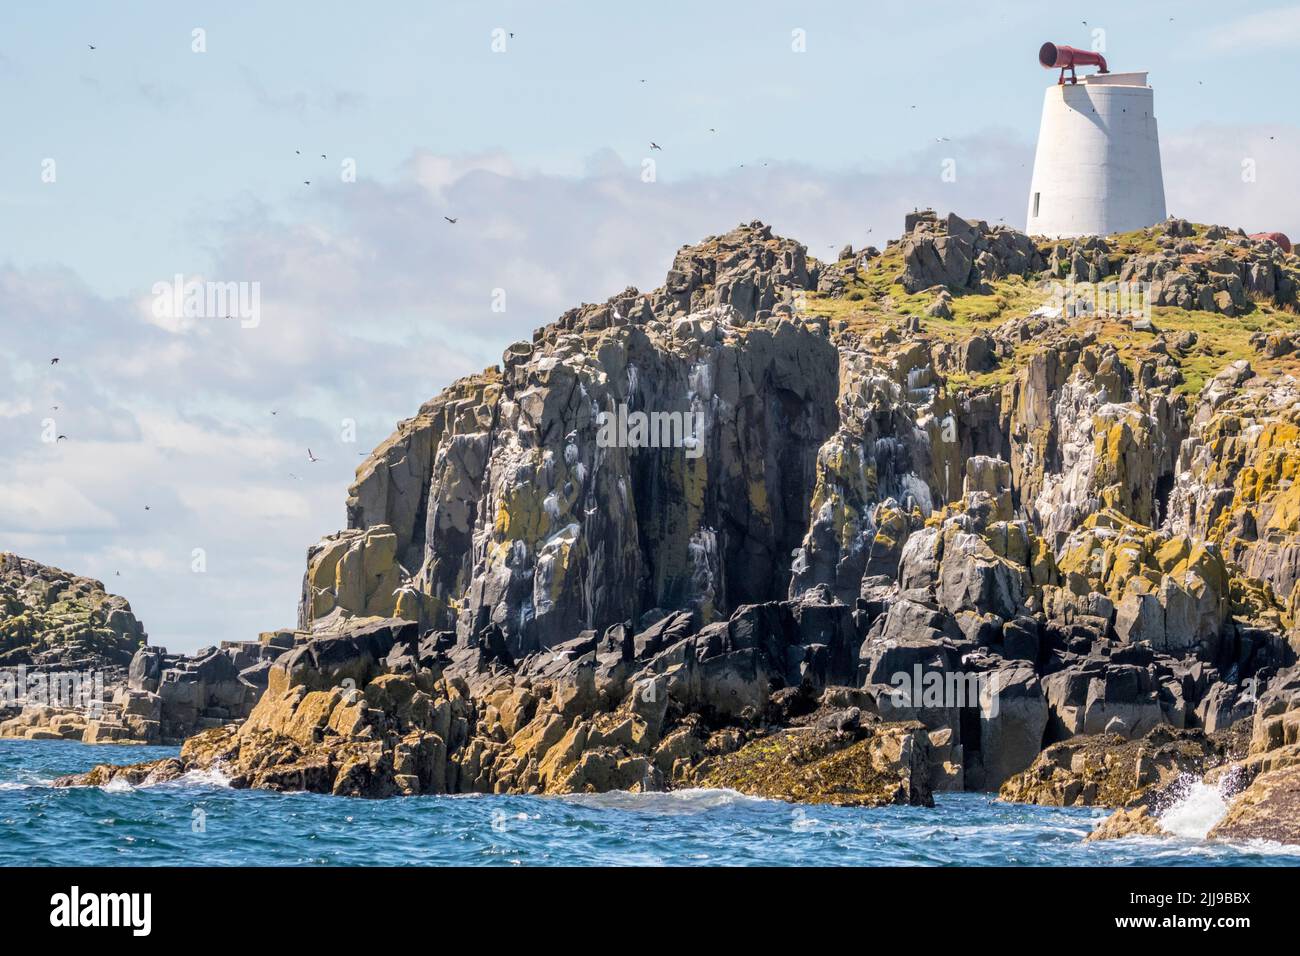 Seabirds on cliffs at the end of the Isle of May in the outer Firth of Forth. Stock Photo